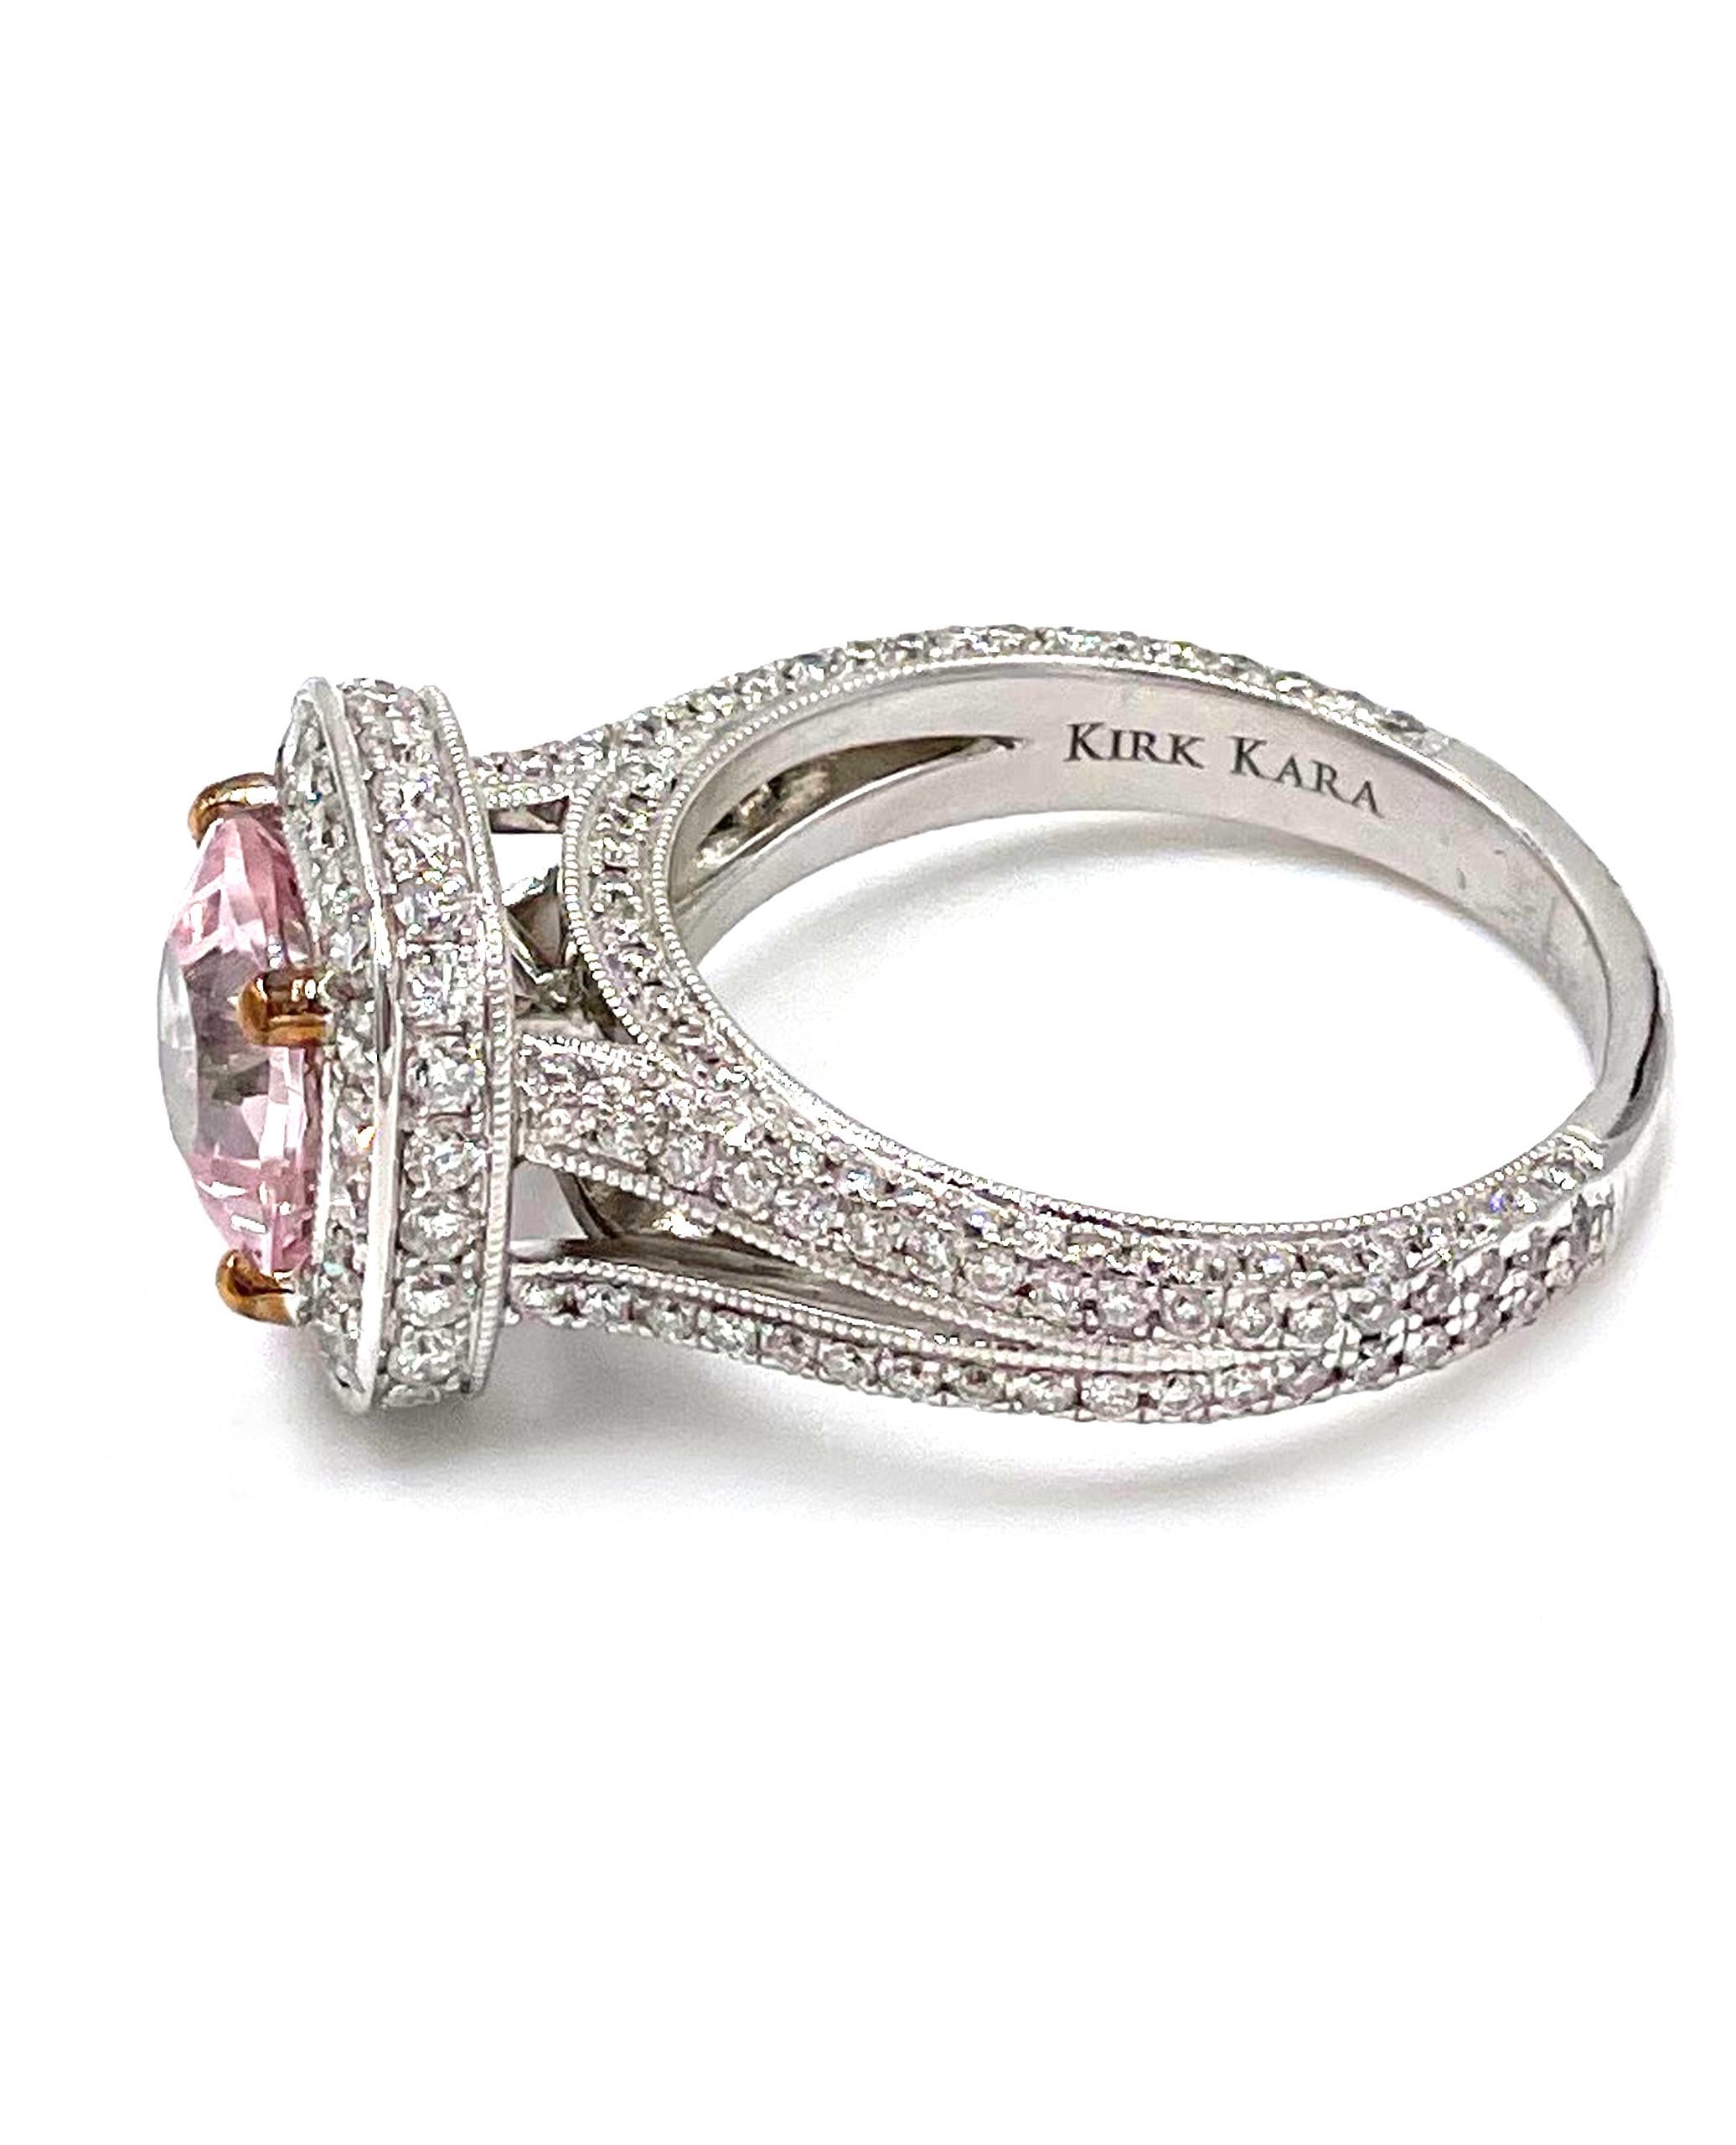 Shining from every angle! This 18K white gold Kirk Kara 